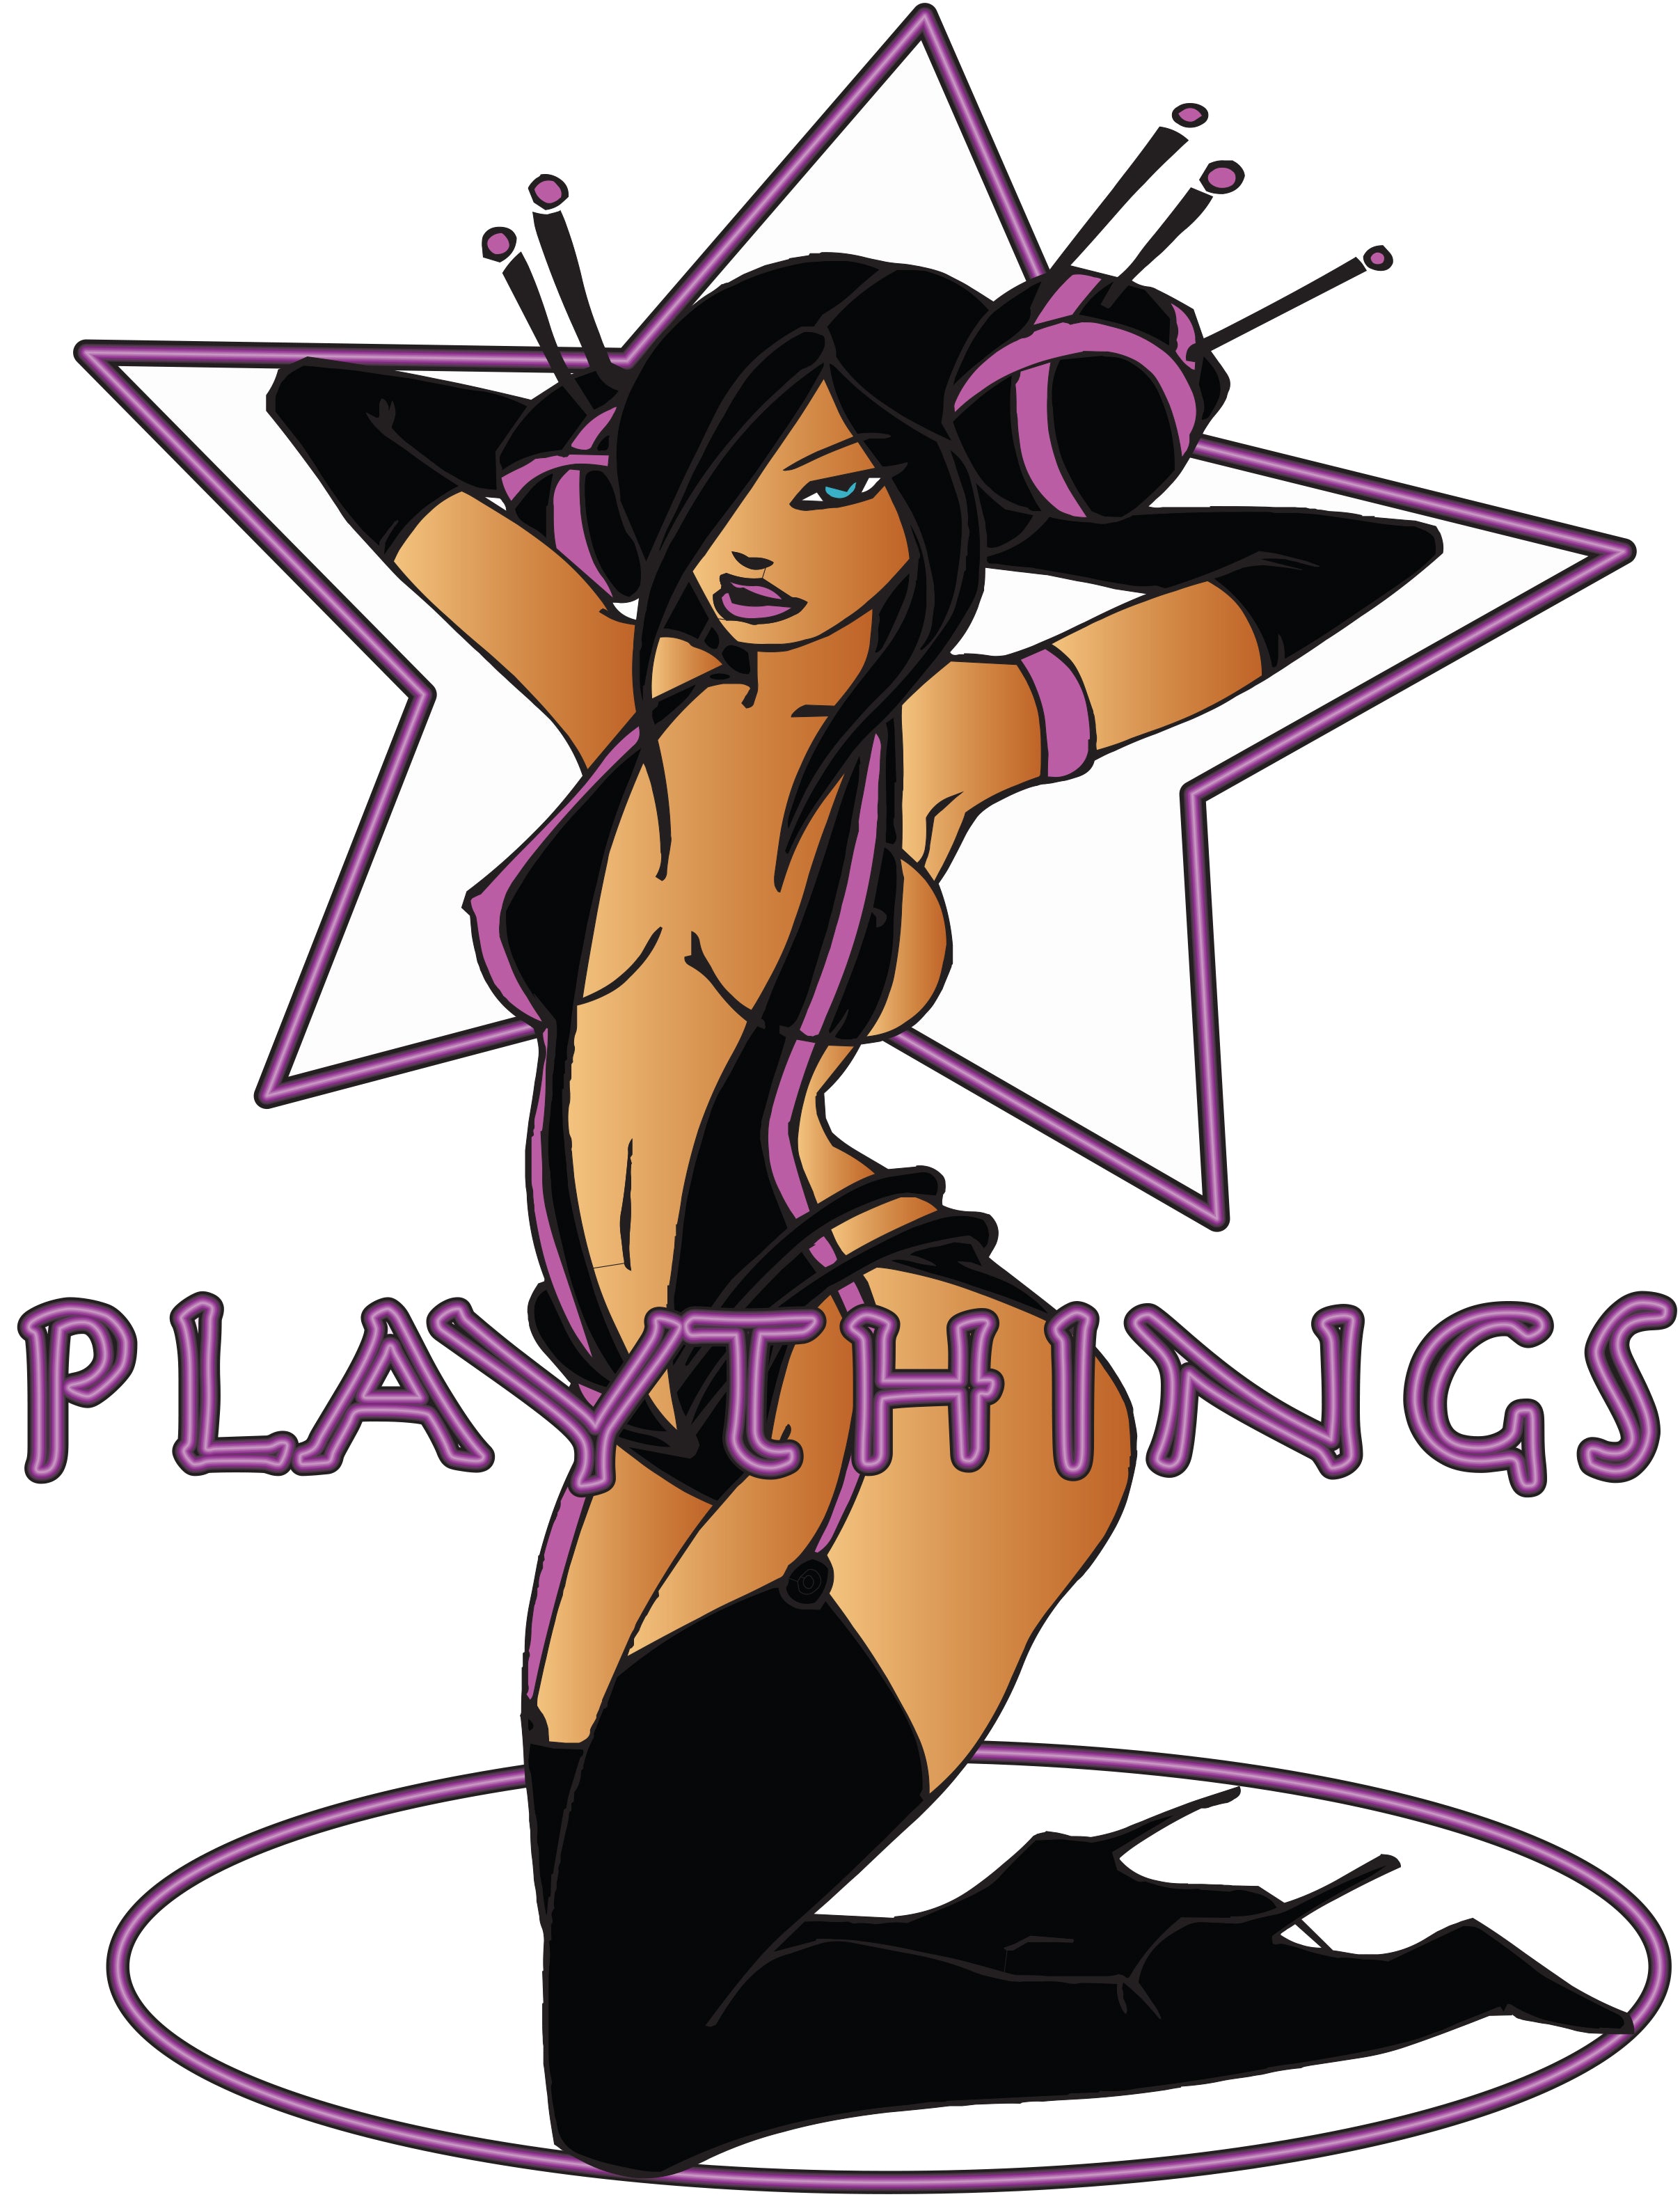 Playthings® - Sex Toys and Outfits Store Miami image